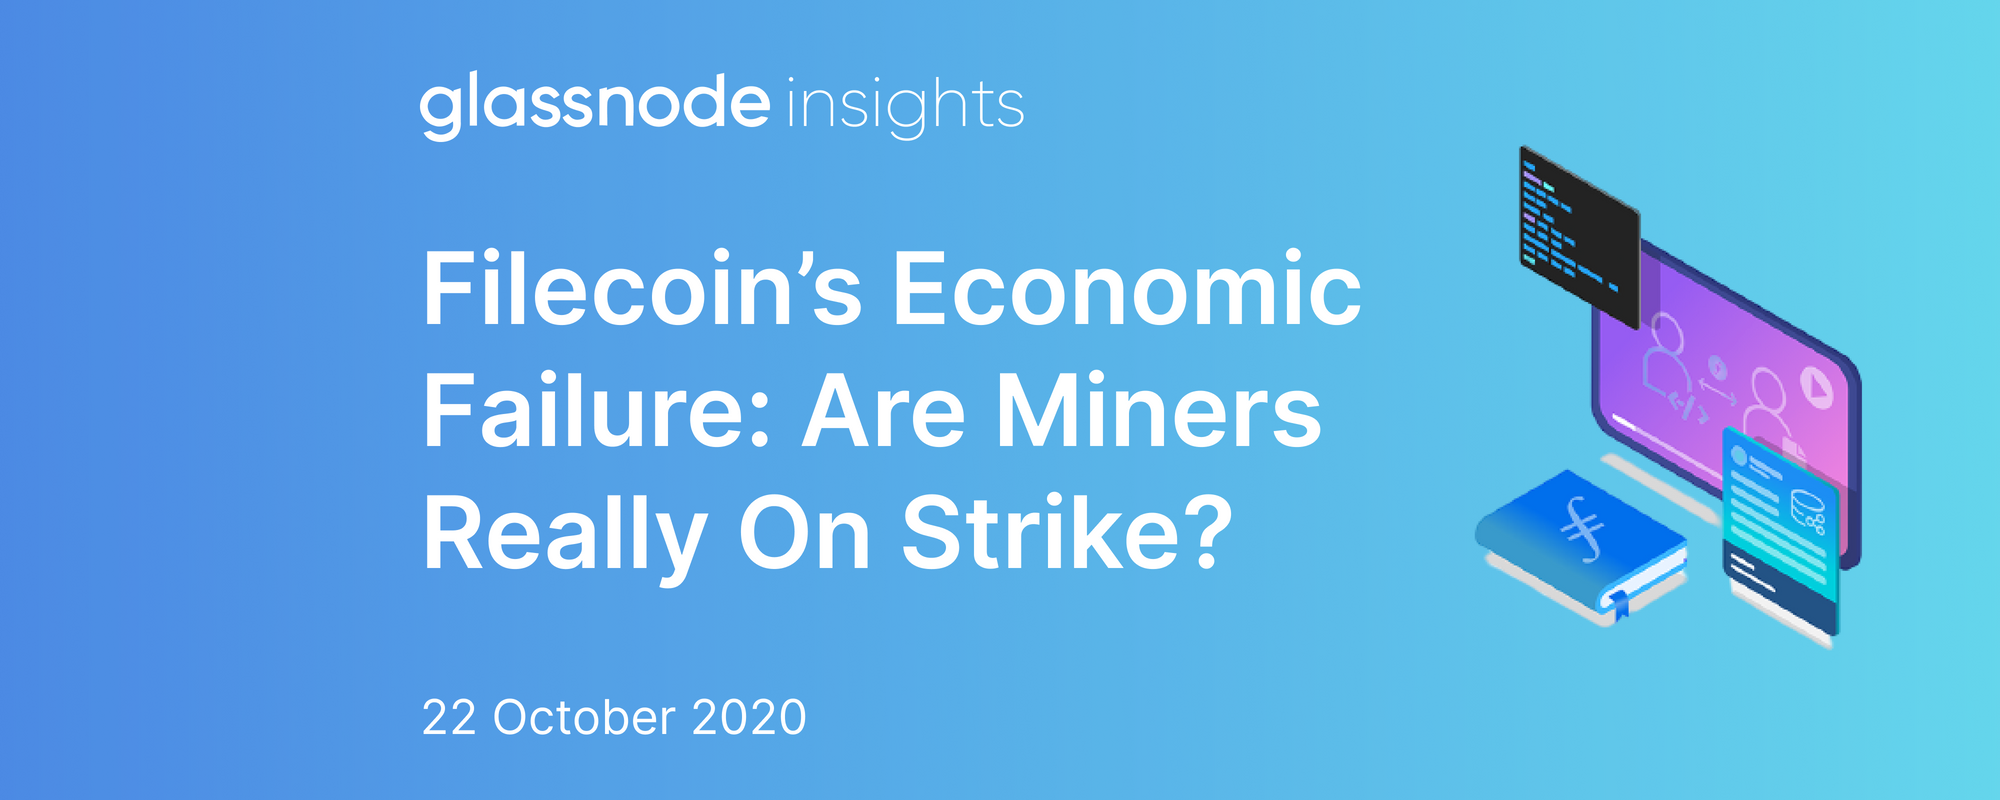 Filecoin’s Economic Failure: Are Miners Really On Strike?